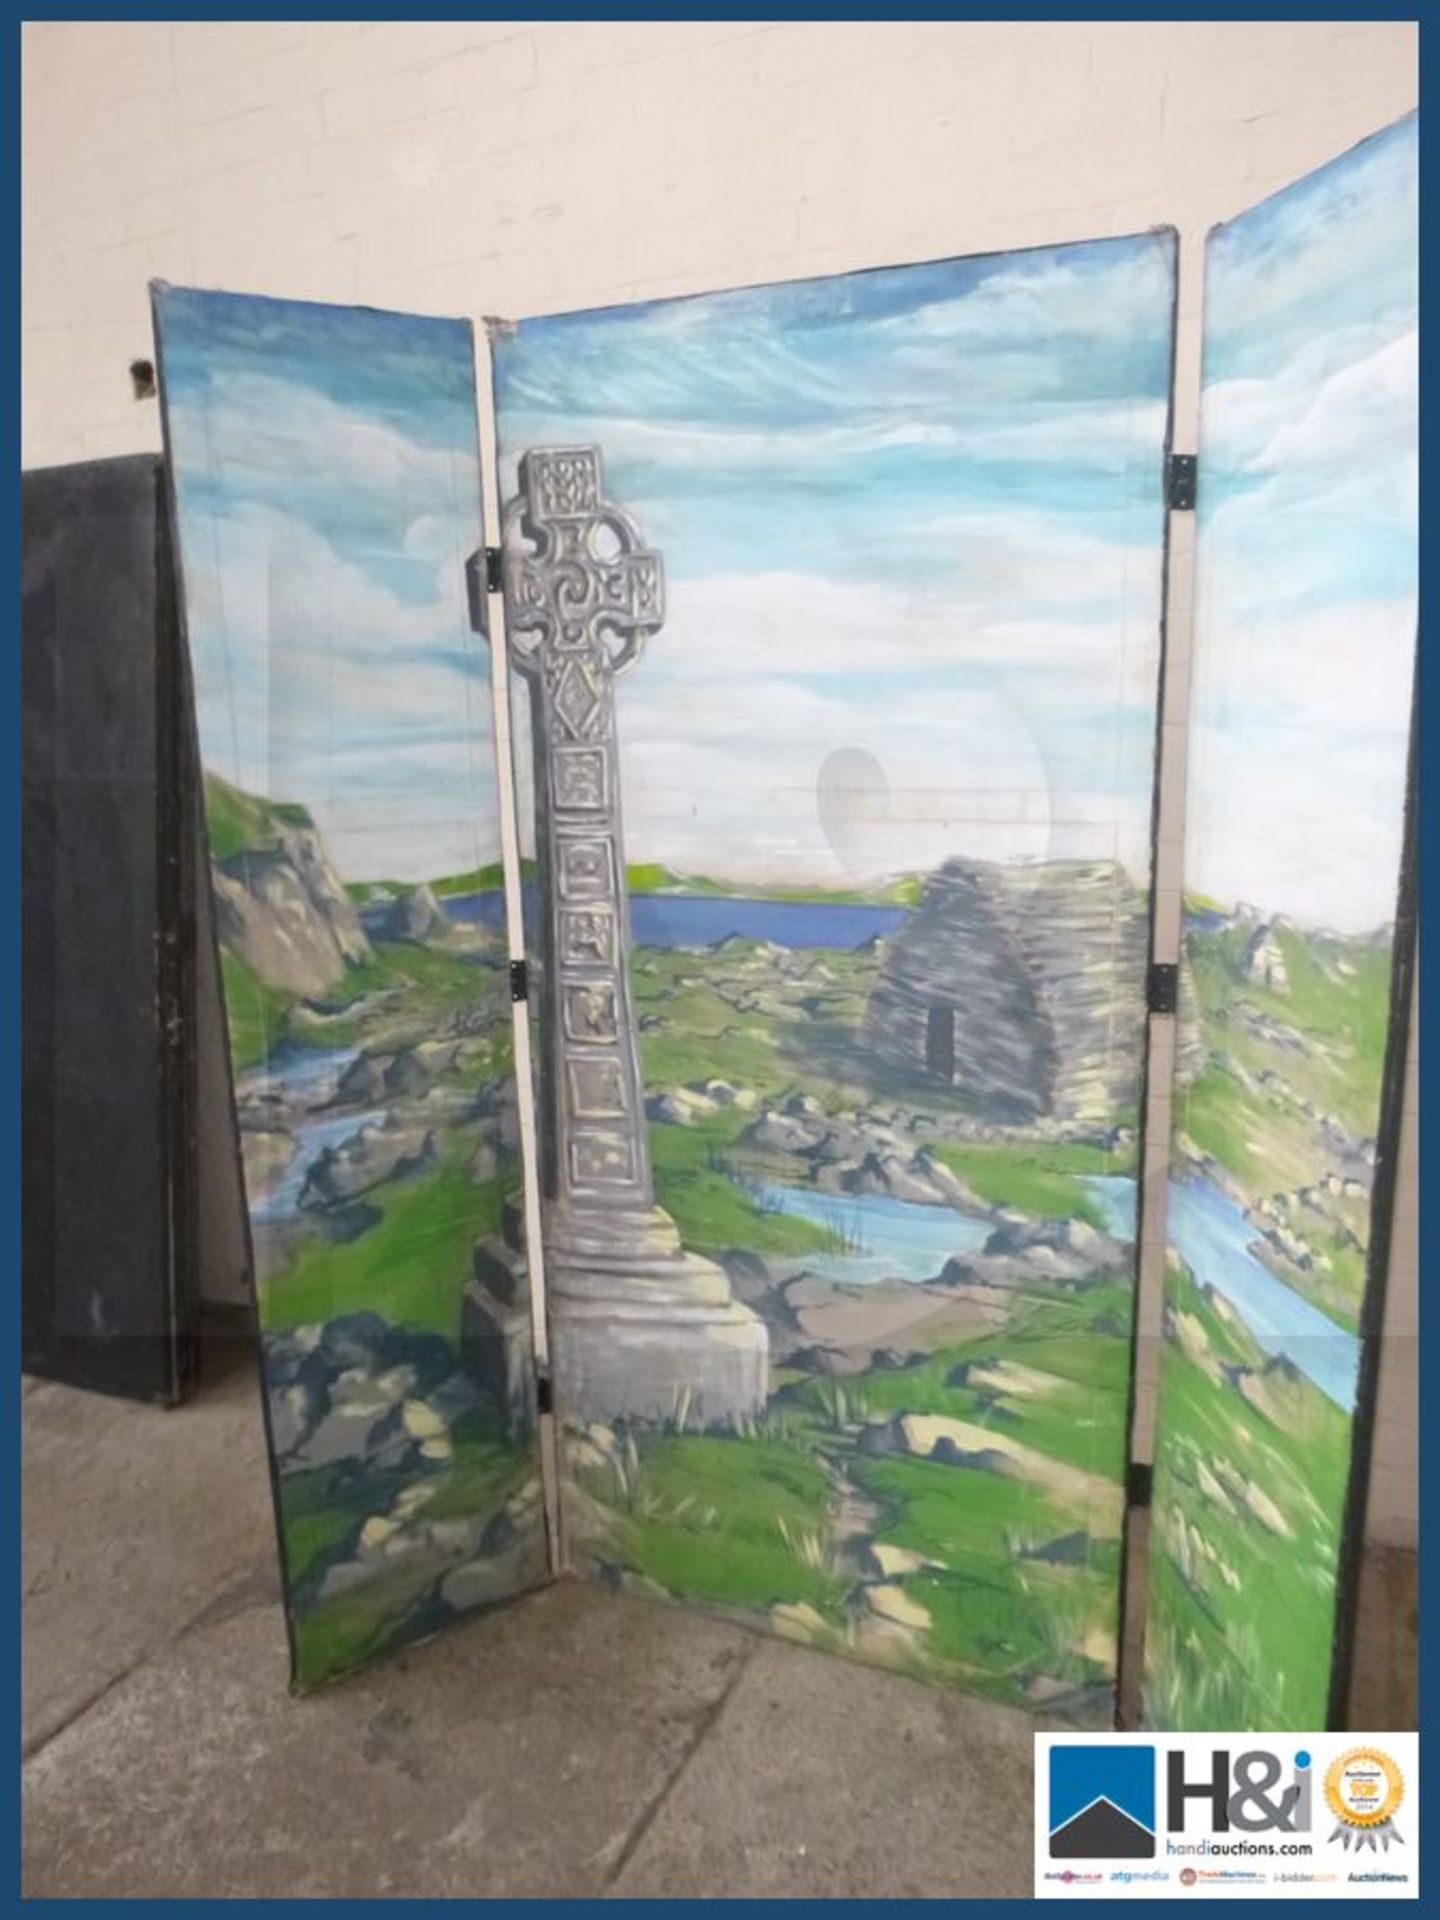 Vintage hand painted theater back drop double sided measuring approx 68" wide X 78" tall .